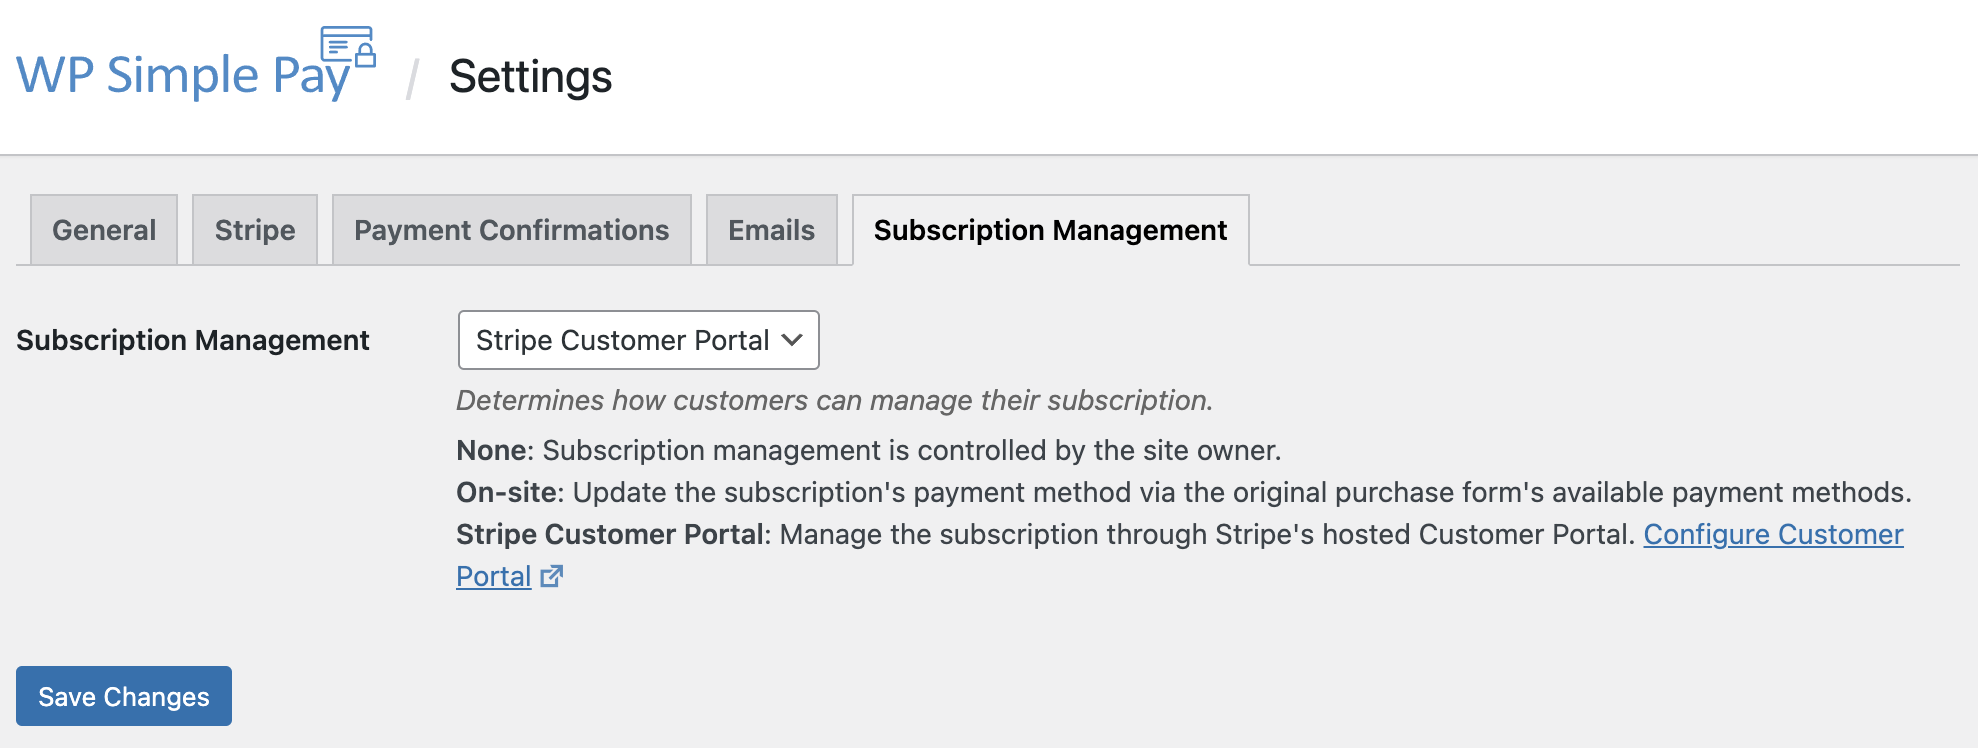 WP Simple Pay subscription management